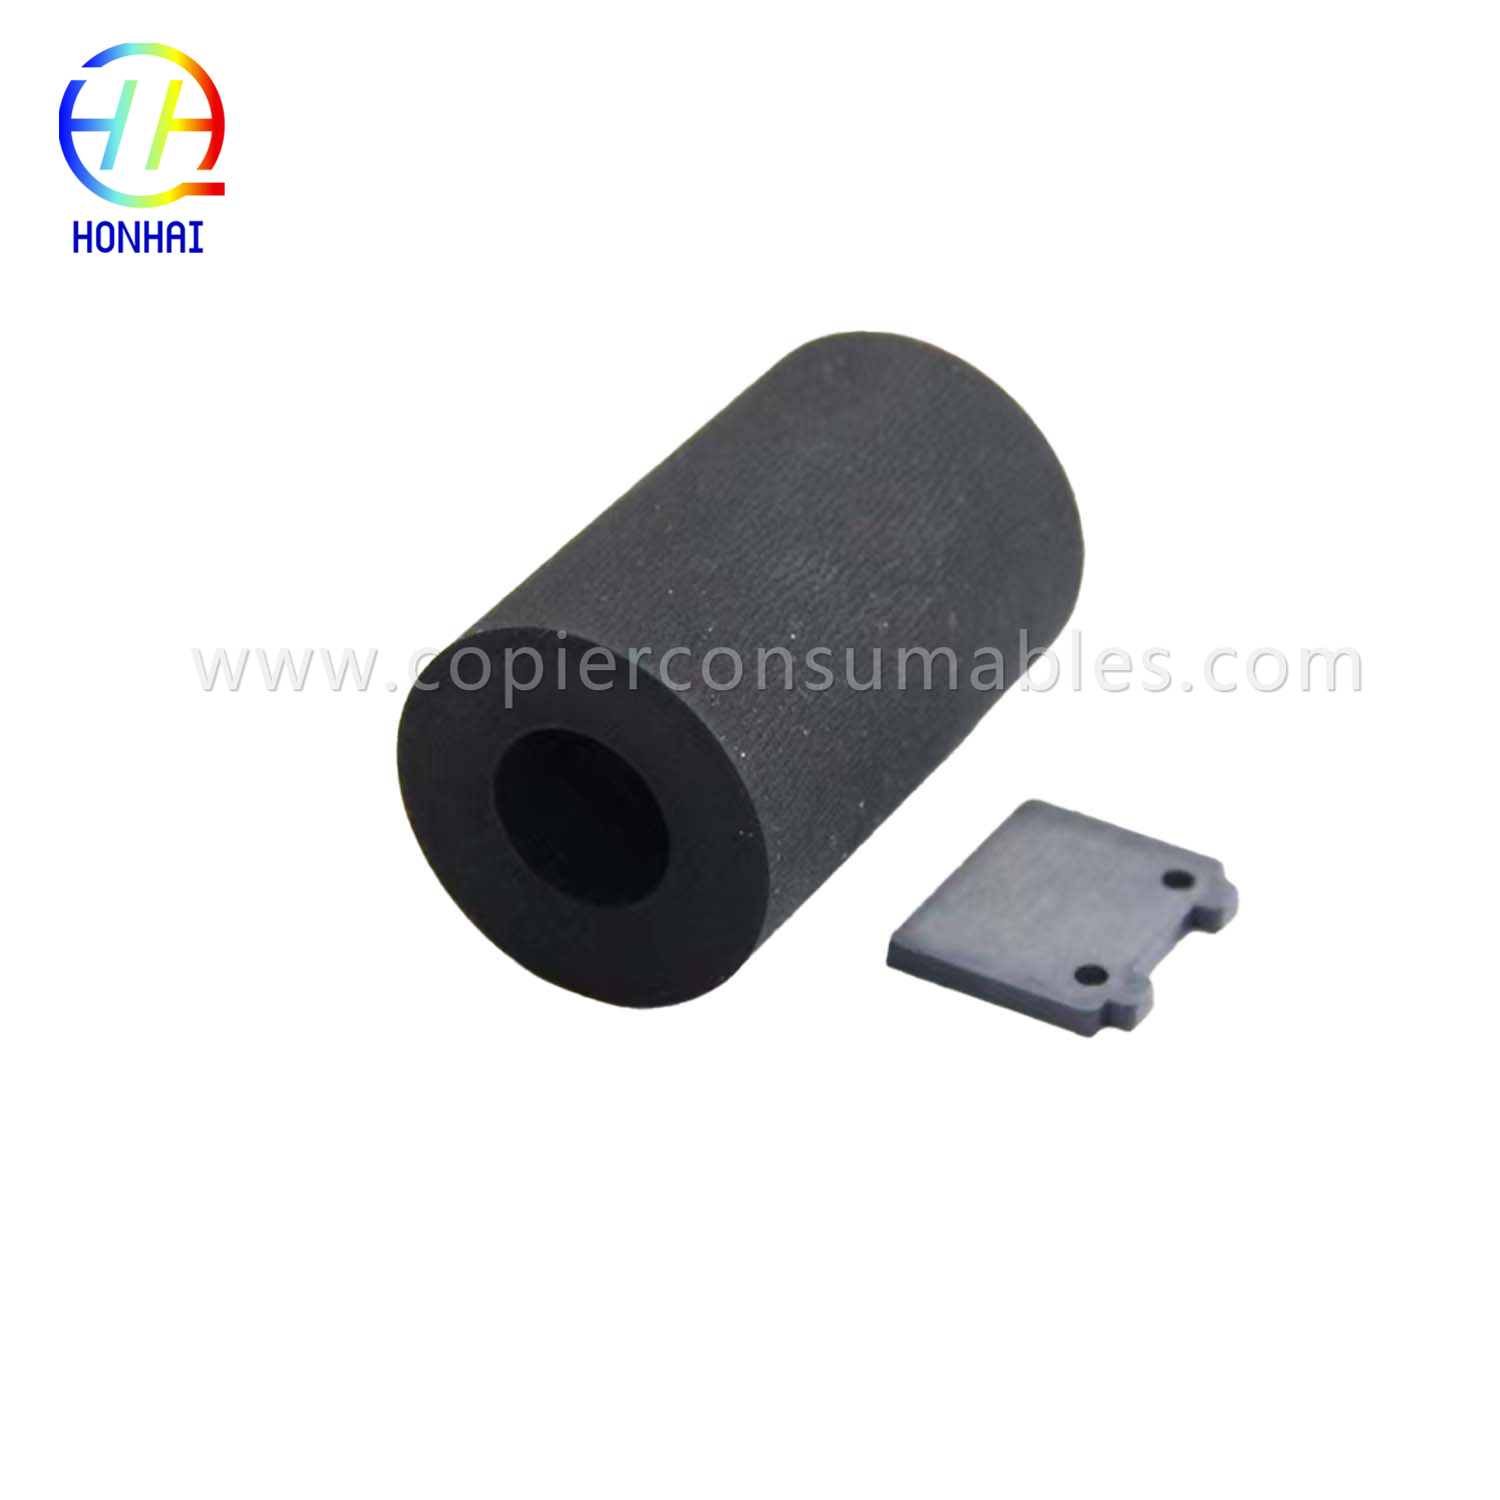 Factory supplied As 3363 - Adf Maintenance Roller Tire for HP Scanjet 3000 S2 L2724A  – HONHAI